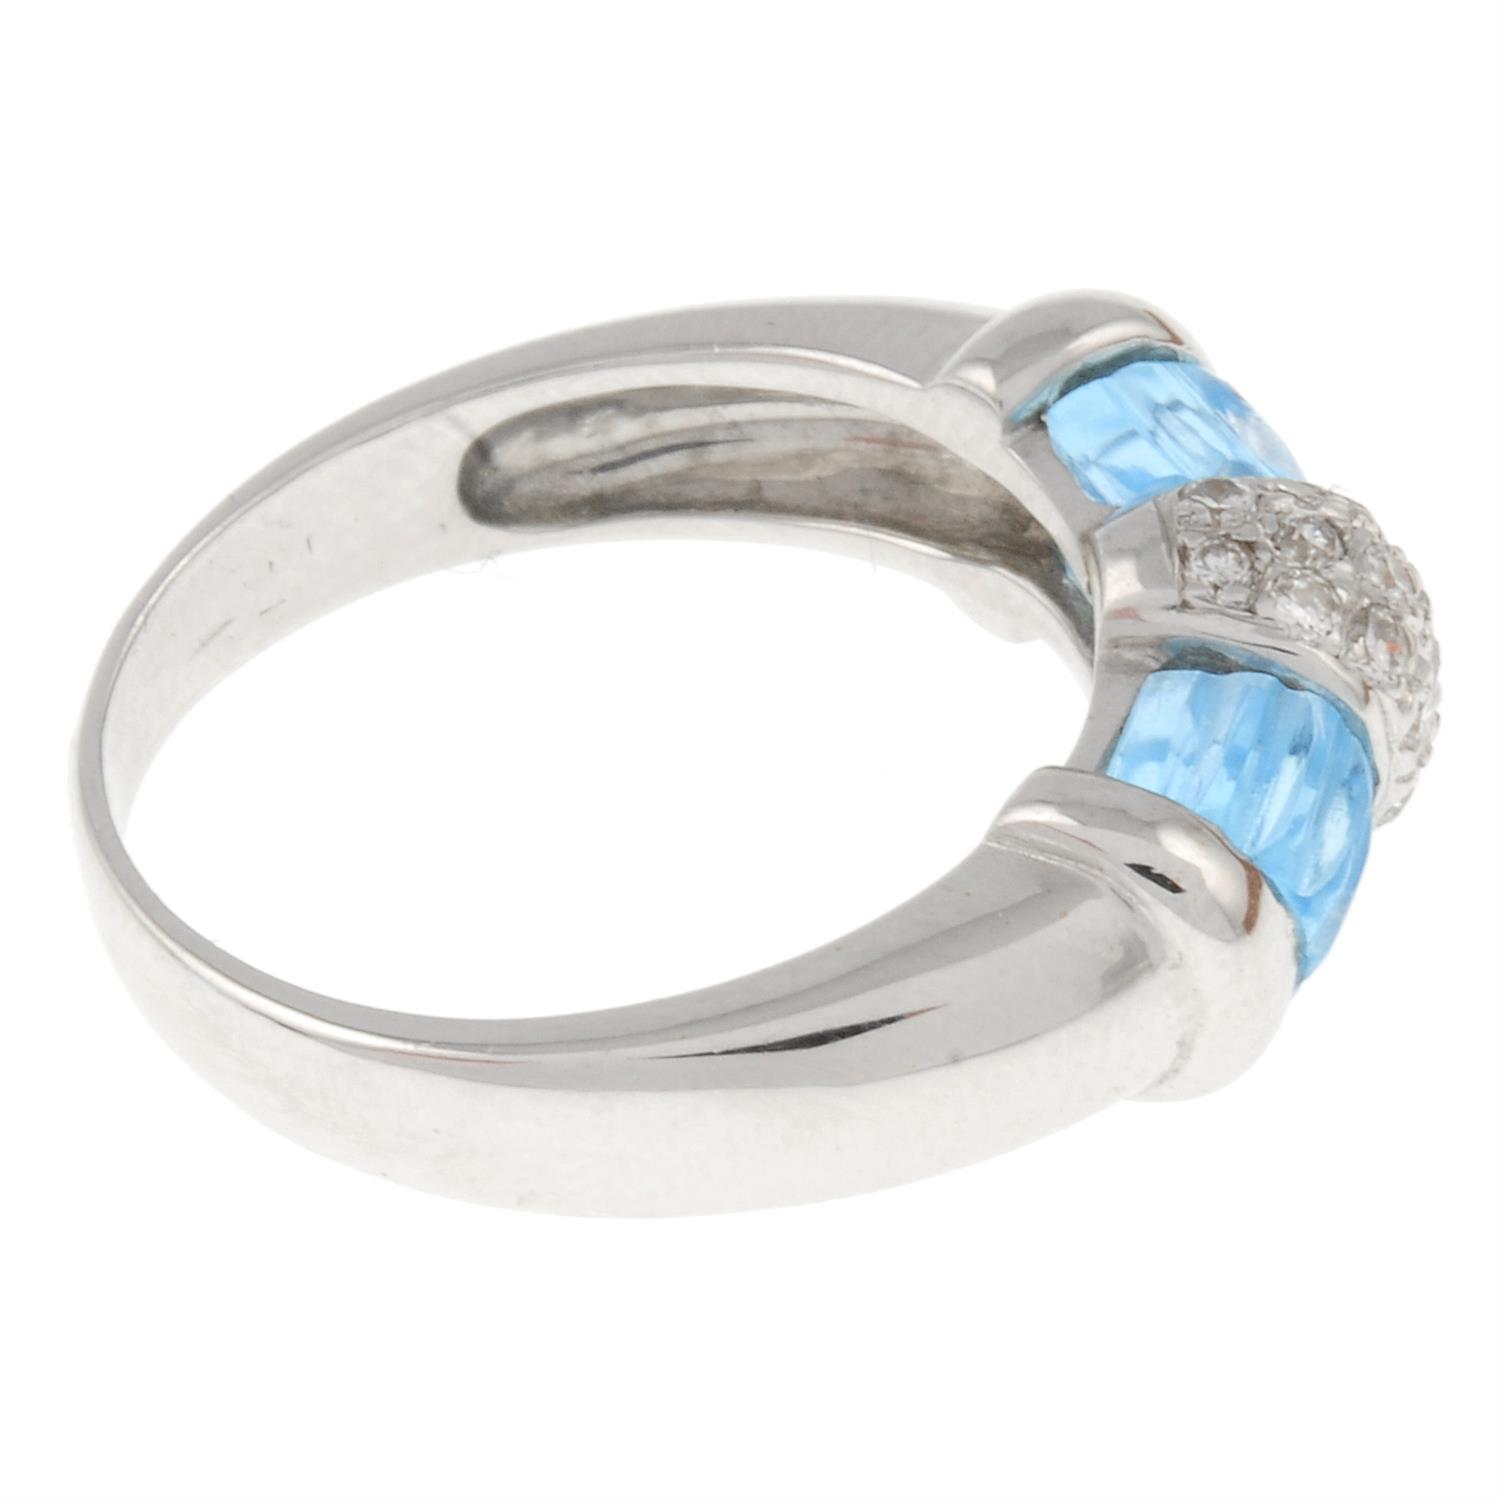 A topaz and pave-set diamond ring. - Image 3 of 4